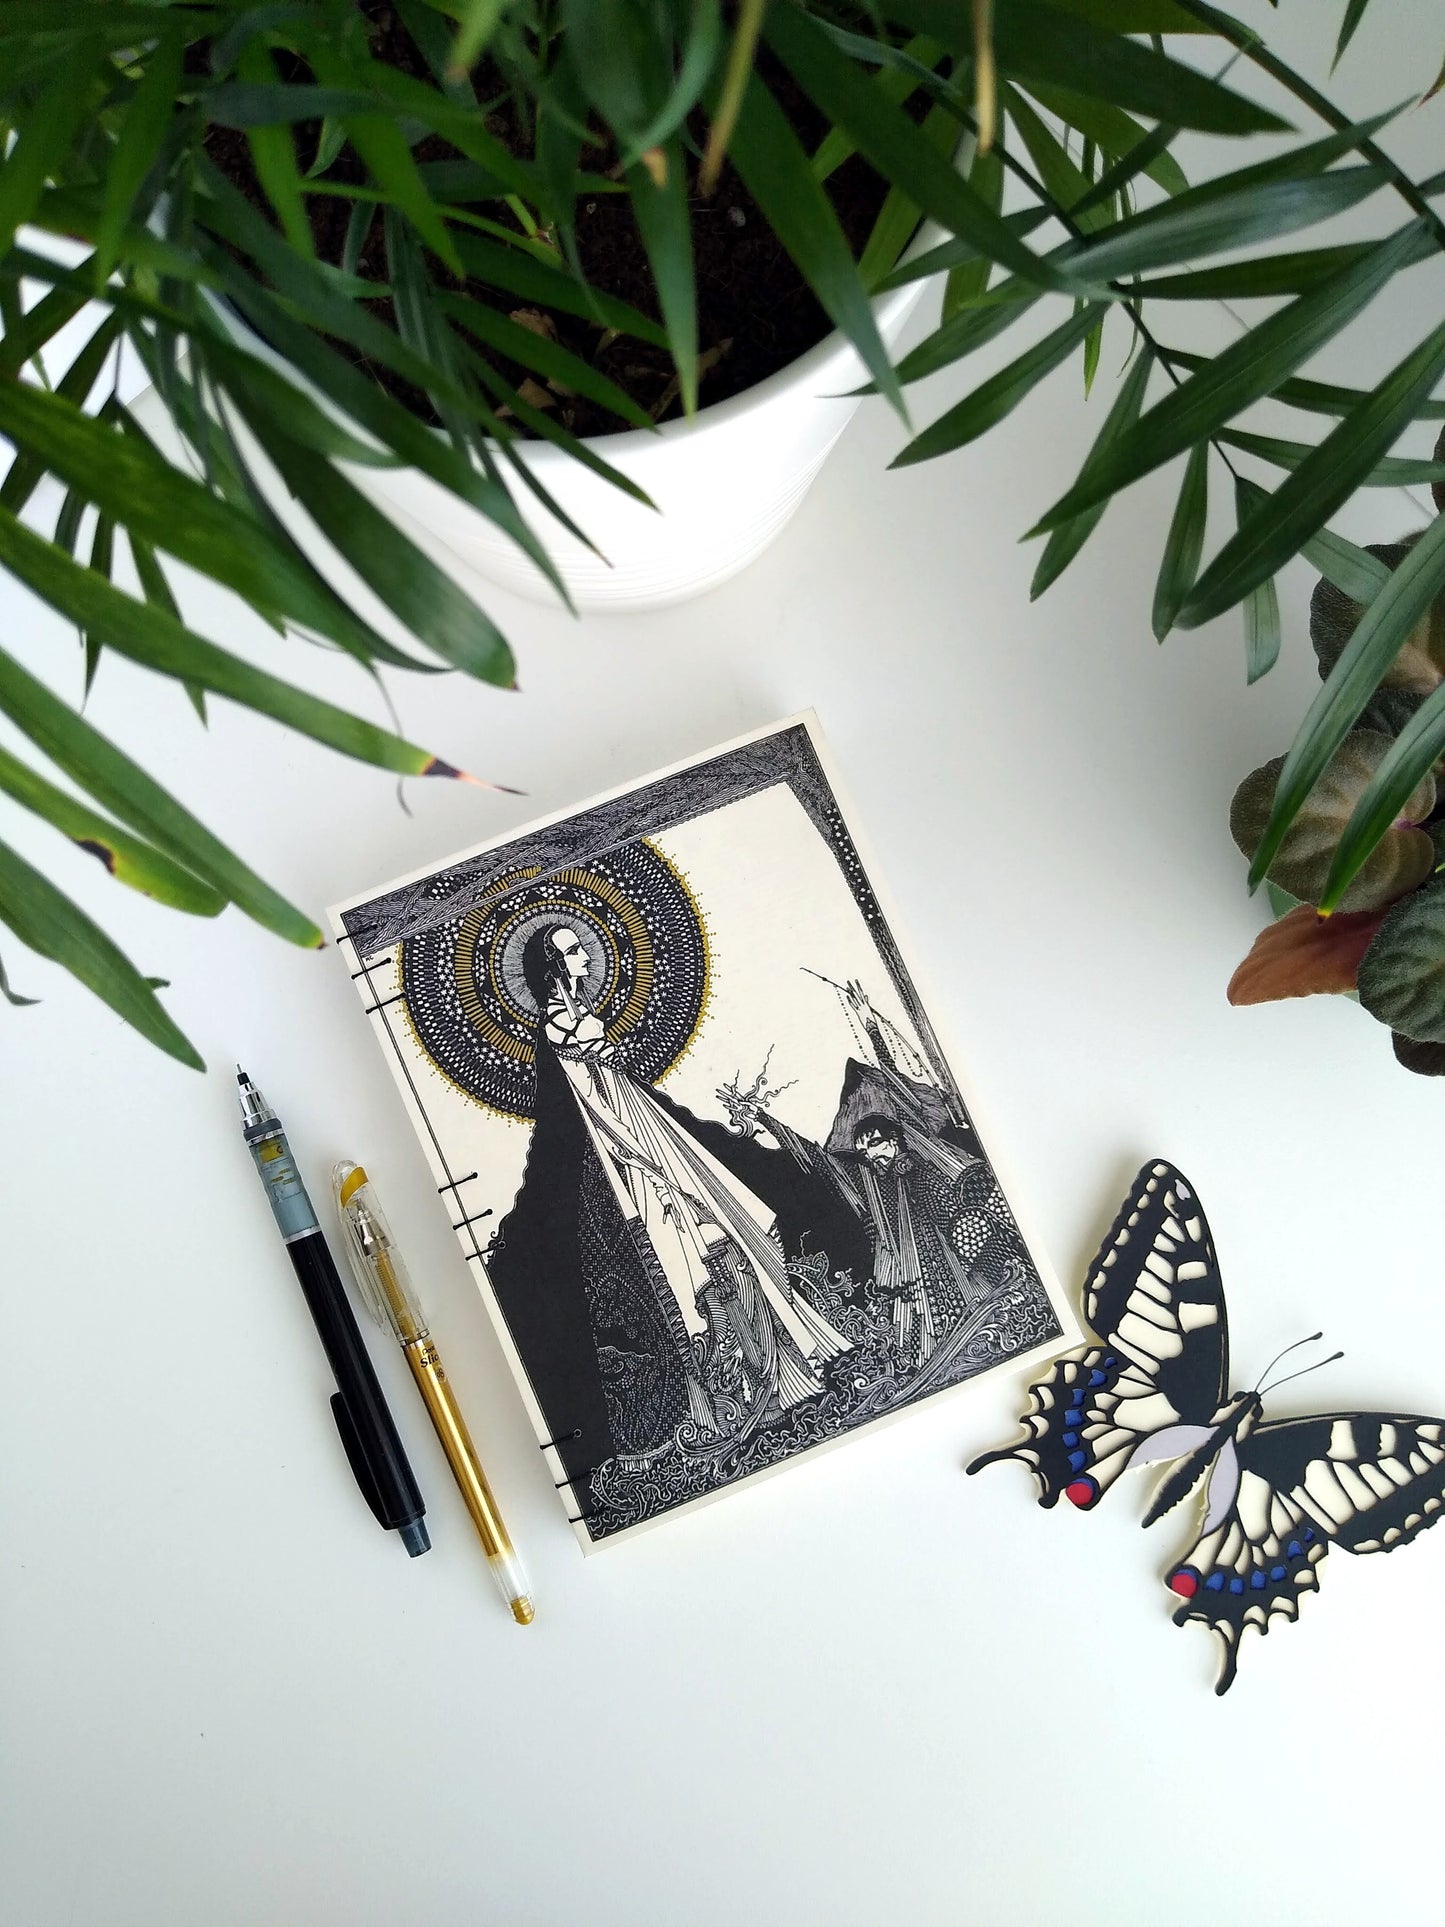 A handmade journal laying on a white desk beside two potted plants, a paper butterfly, a gold pen, and a black mechanical pencil. The cover of the journal is cream with printed with an illustration by Harry Clarke. It has a woman standing with a stylized halo/starburst behind her head with a man in supplication at her feet.